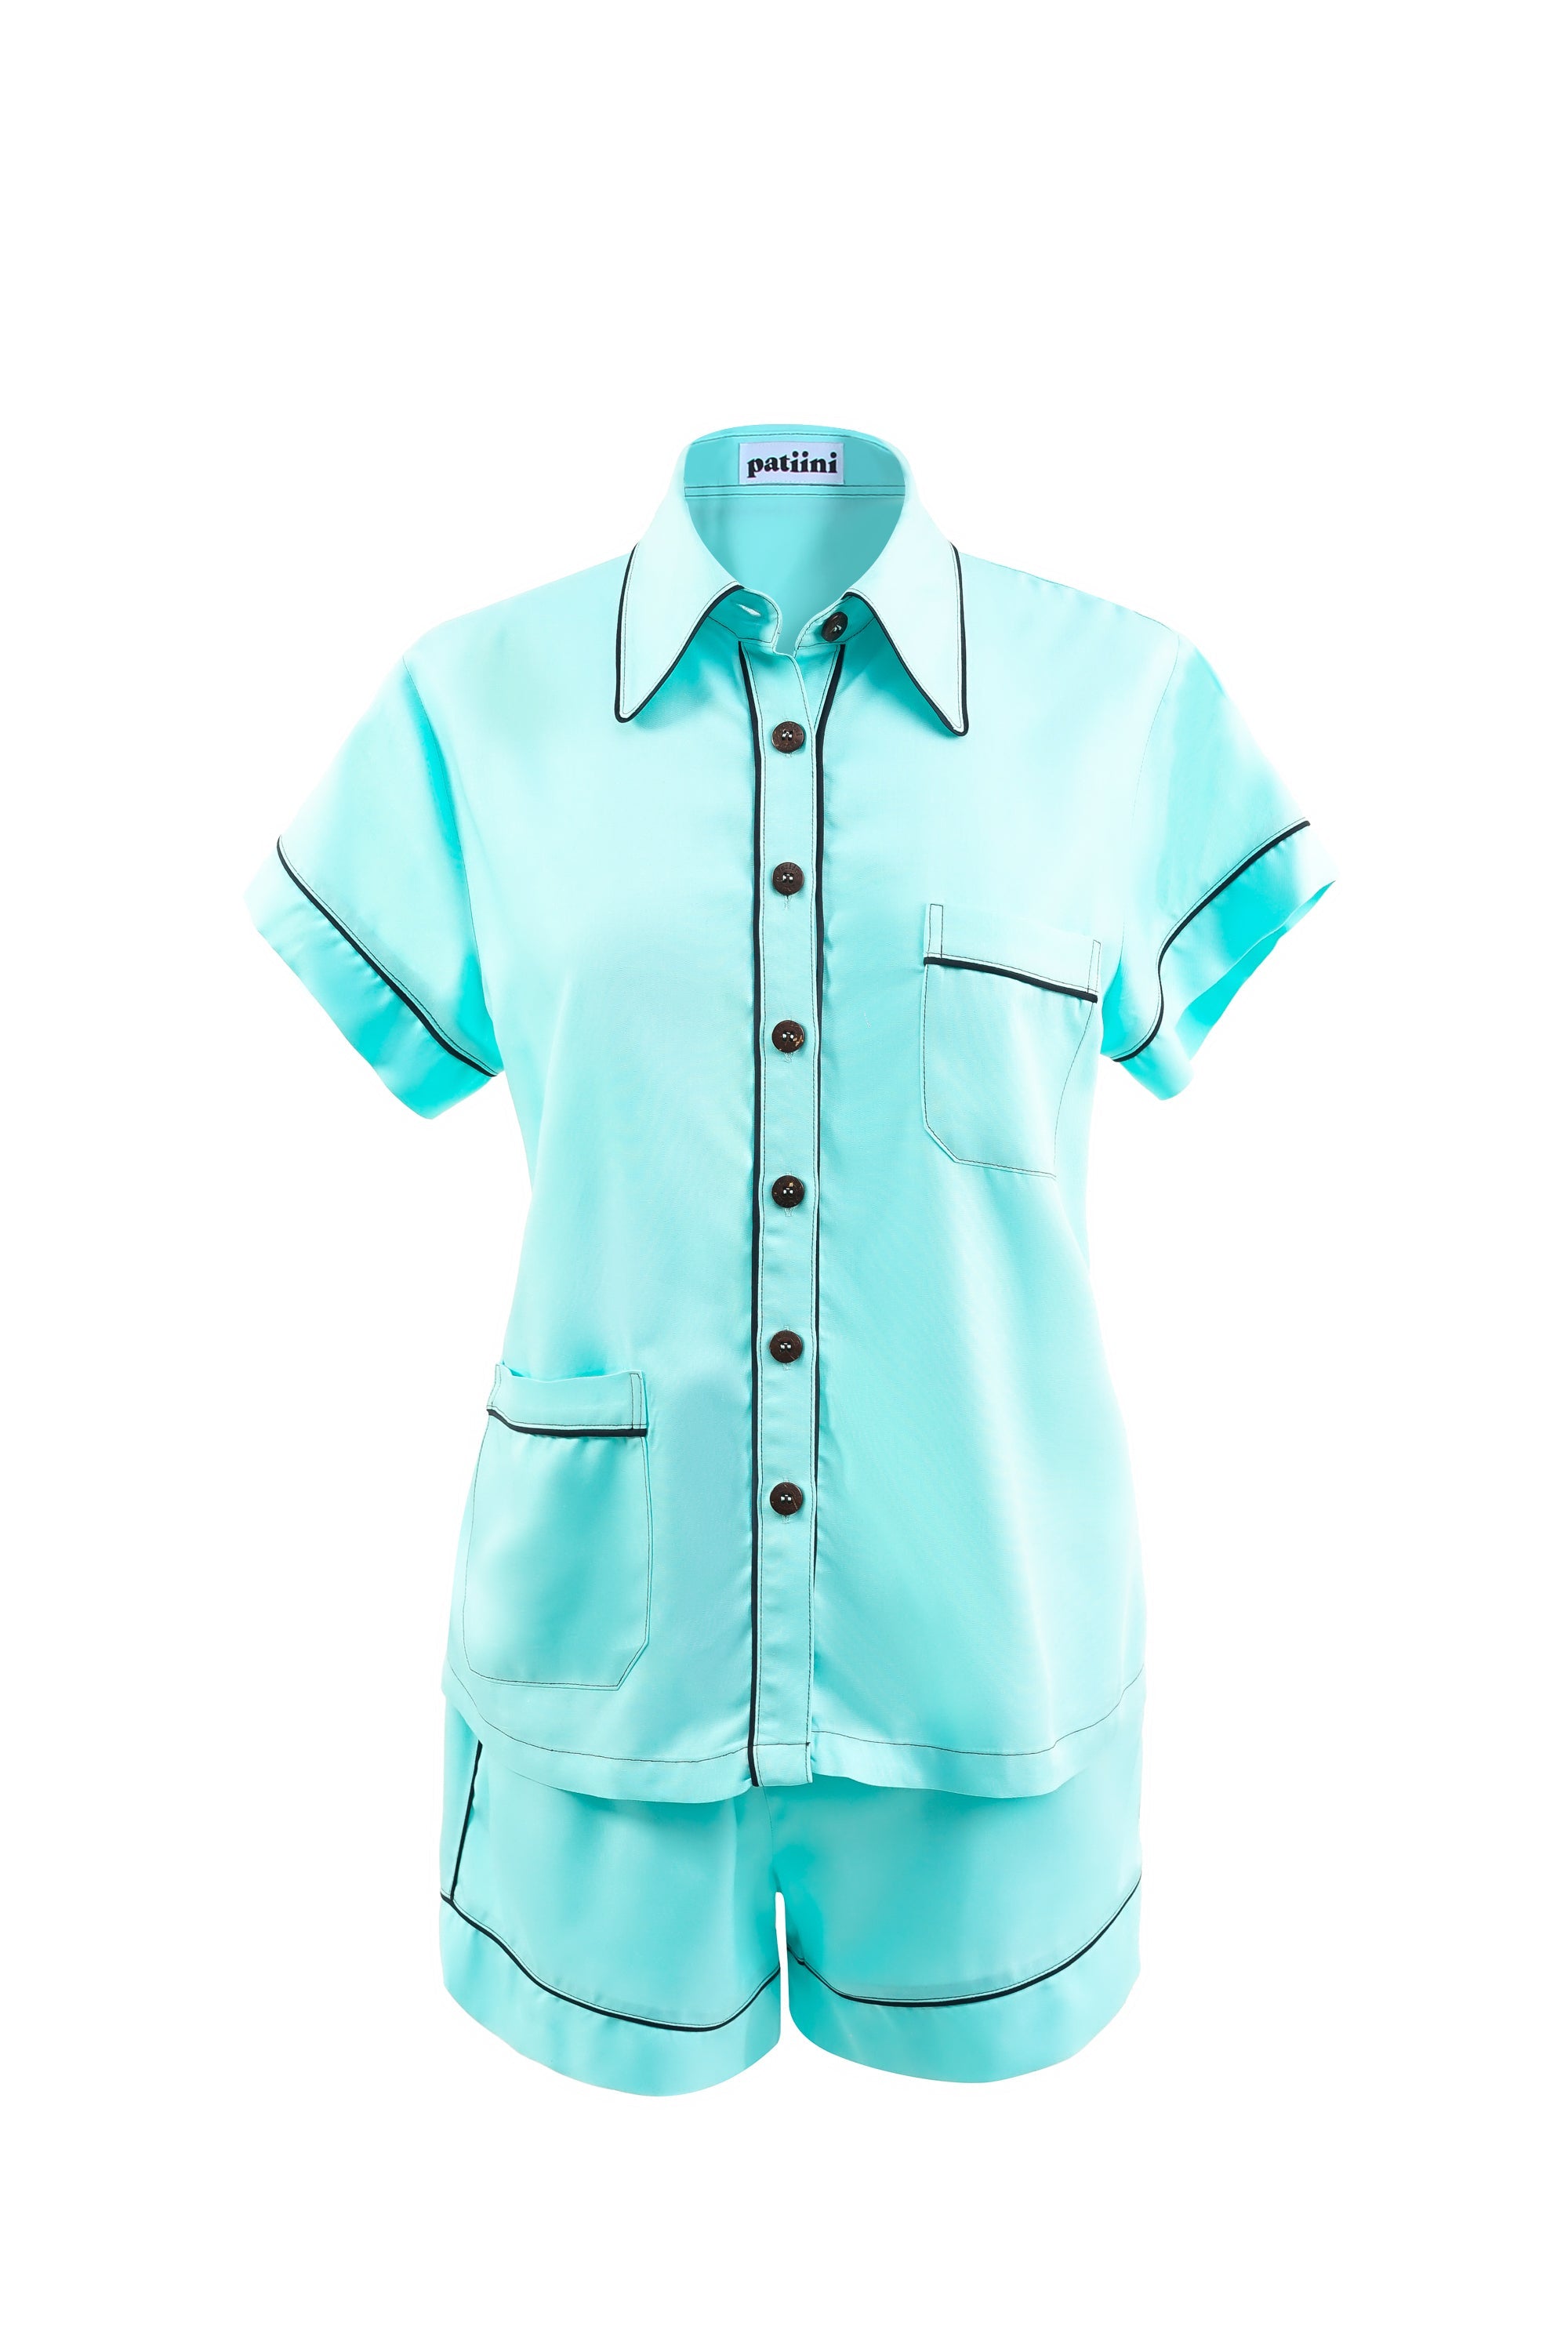 Teal short-sleeved pajama set with black contrasting piping.